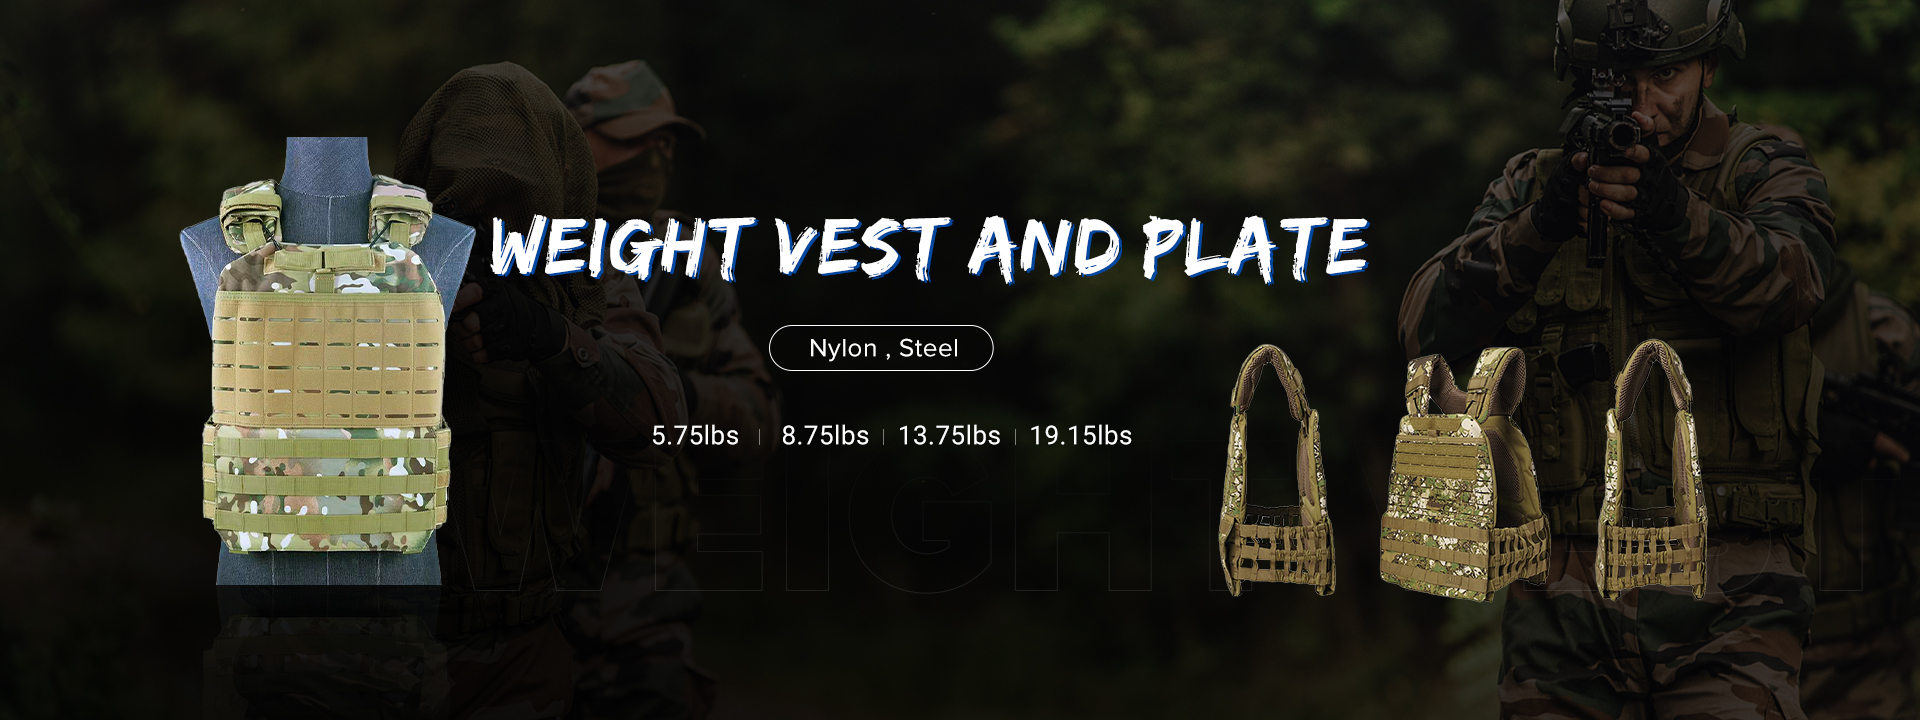 WEIGHT VEST AND PLATE